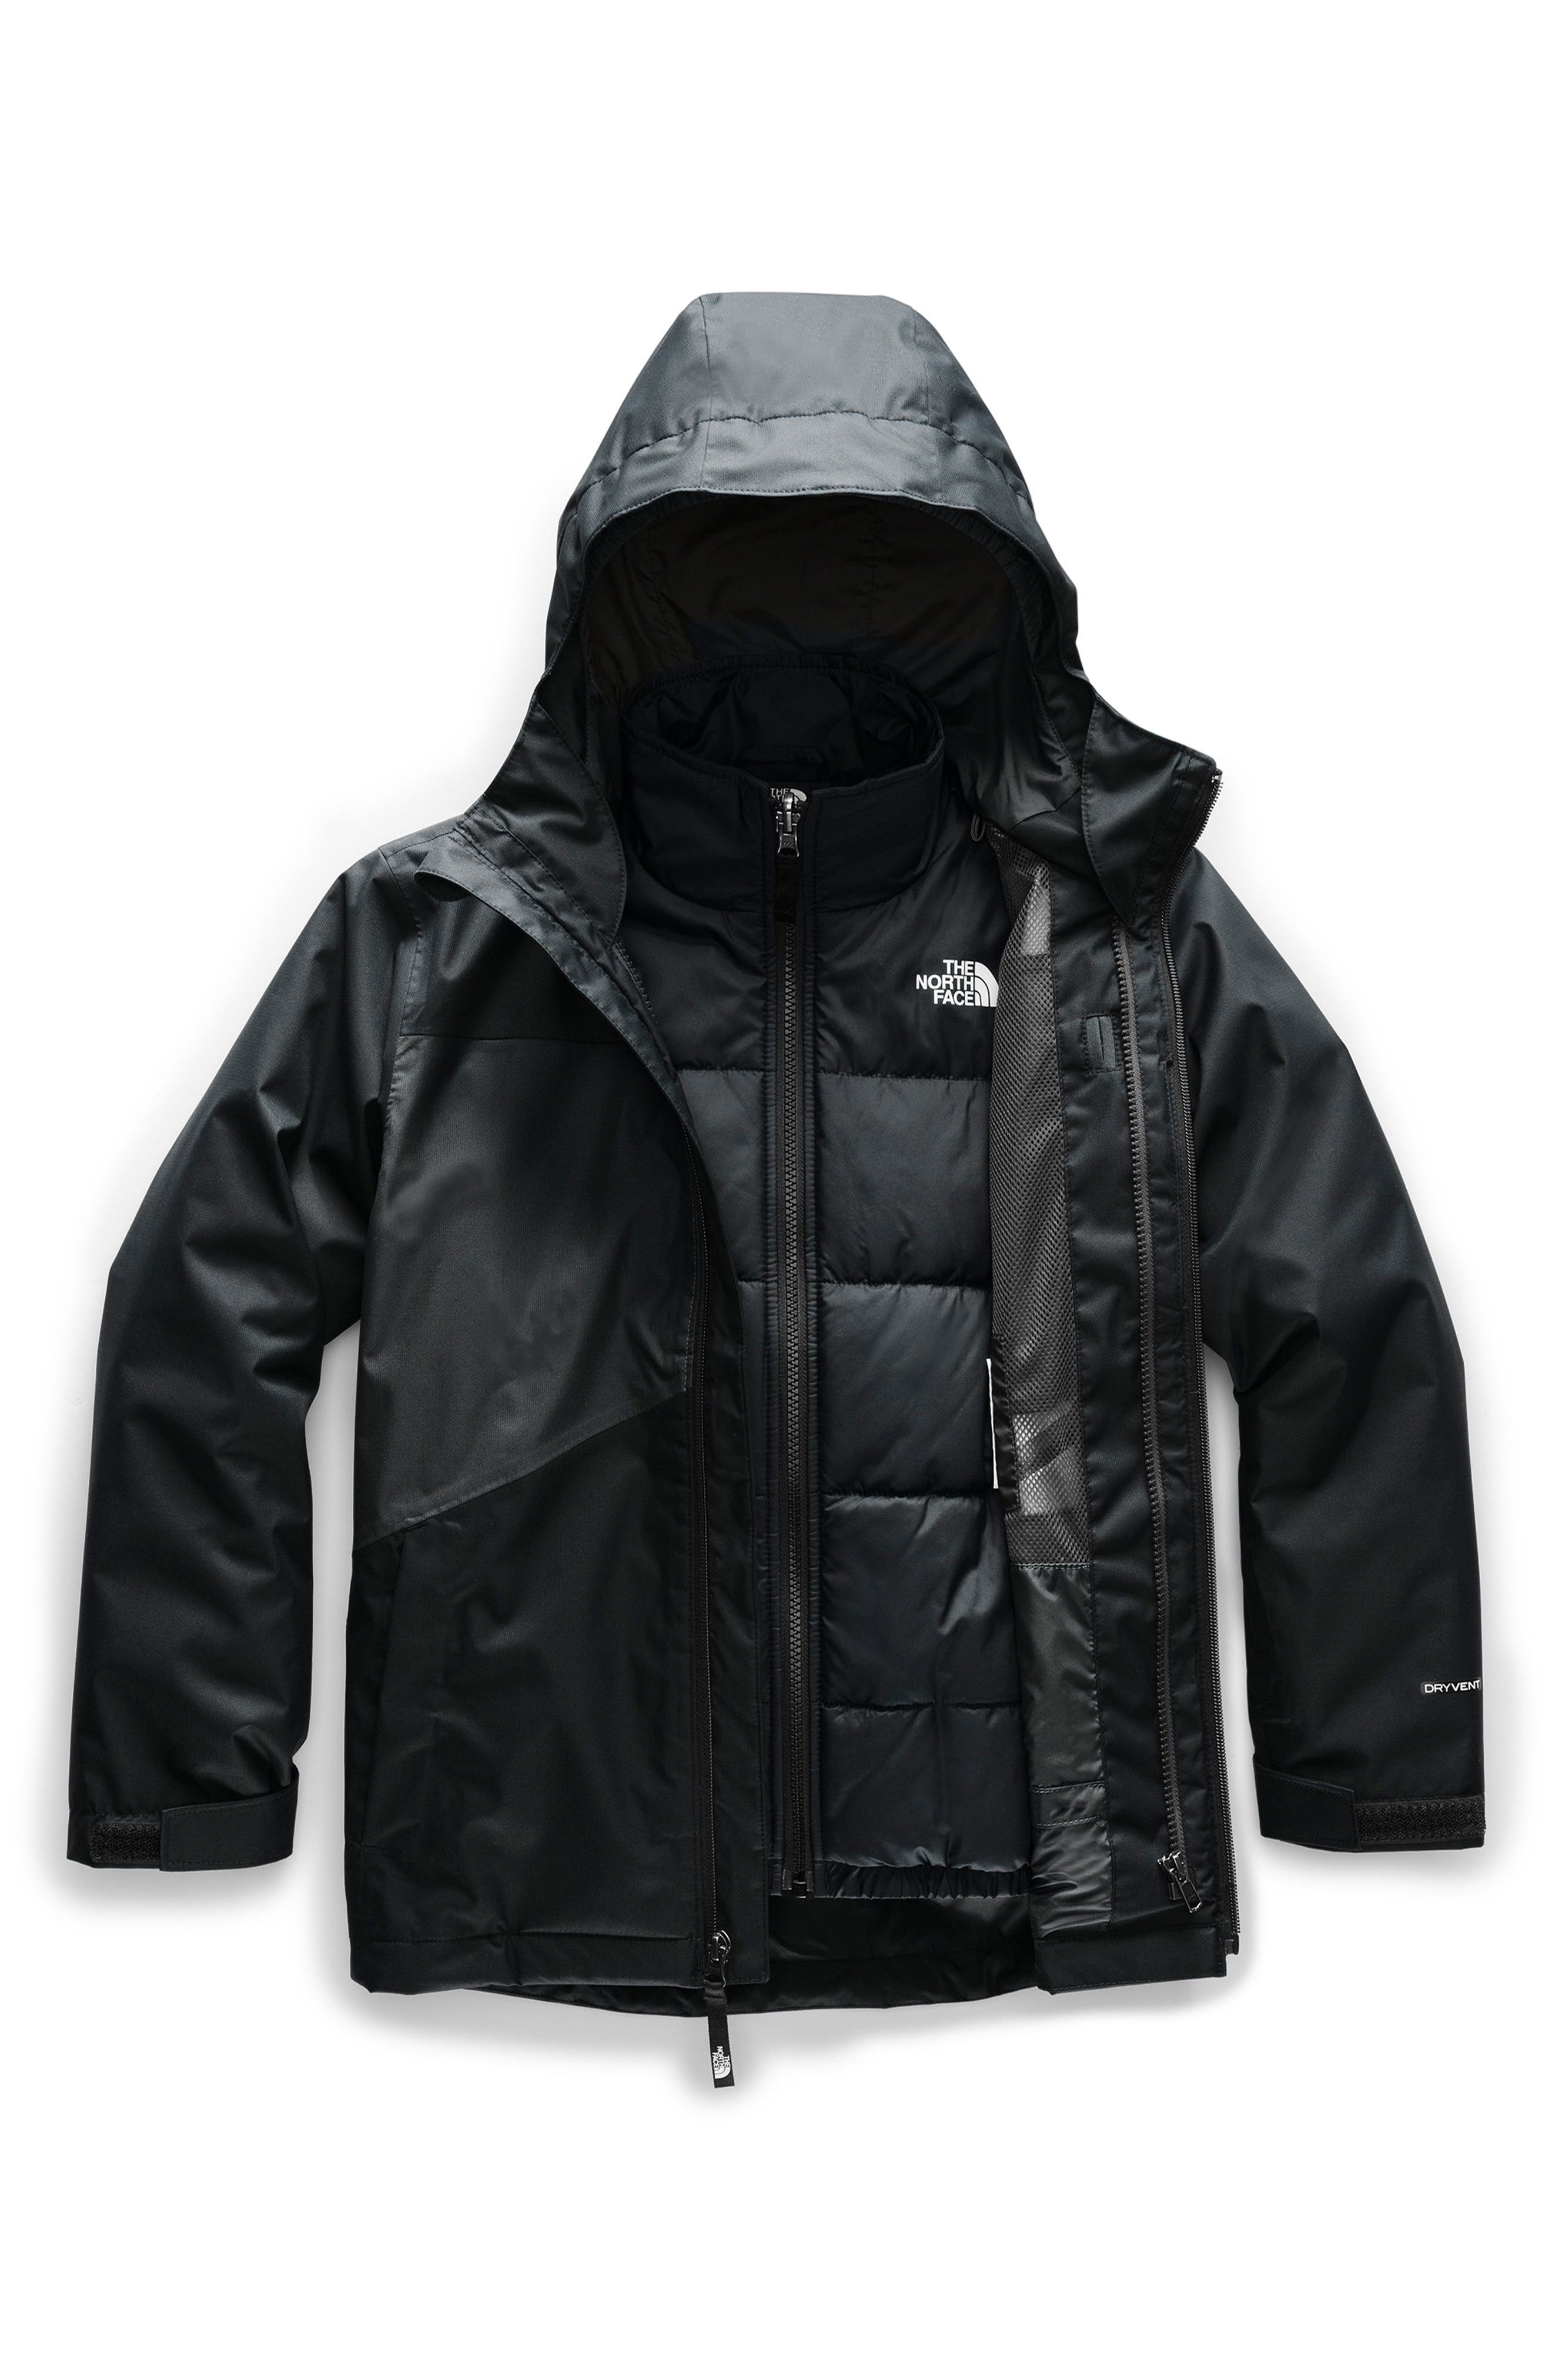 north face 3 in 1 parka